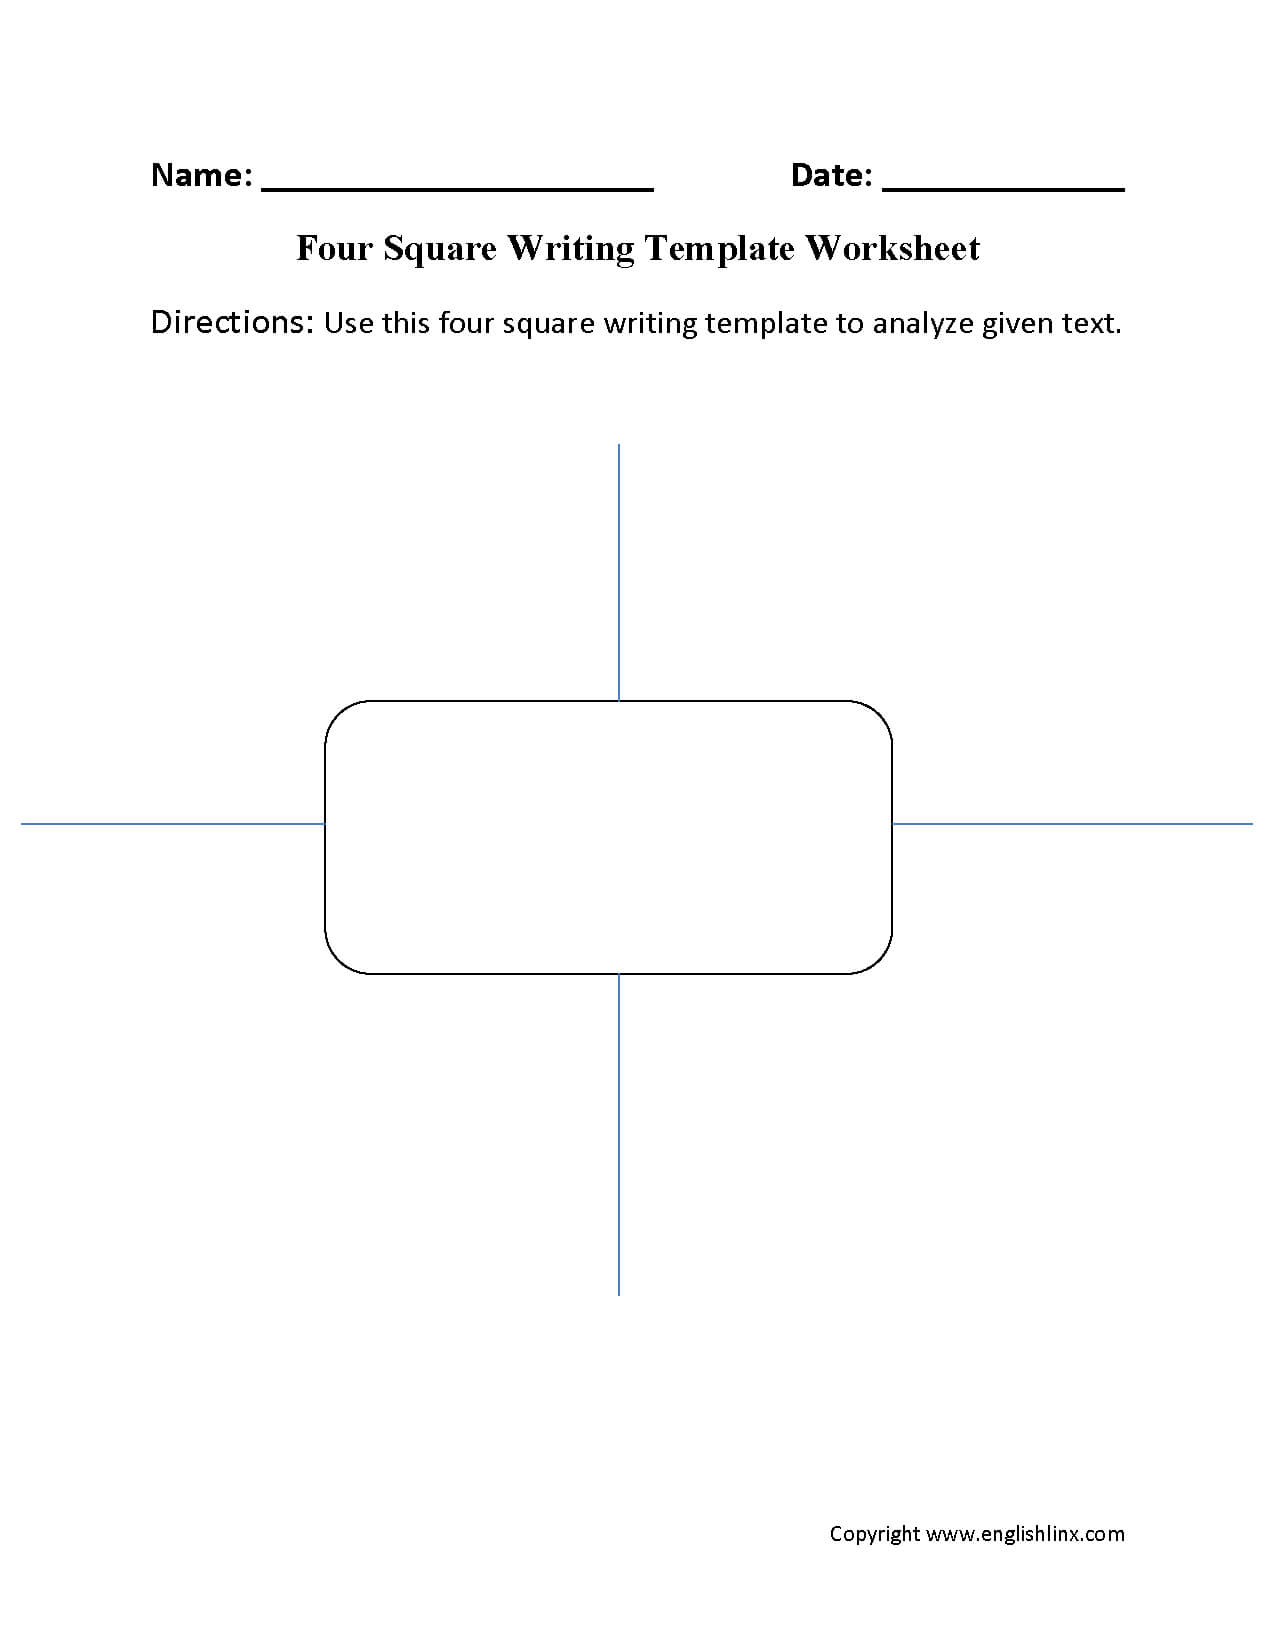 Writing Worksheets | Writing Template Worksheets Pertaining To Blank Four Square Writing Template